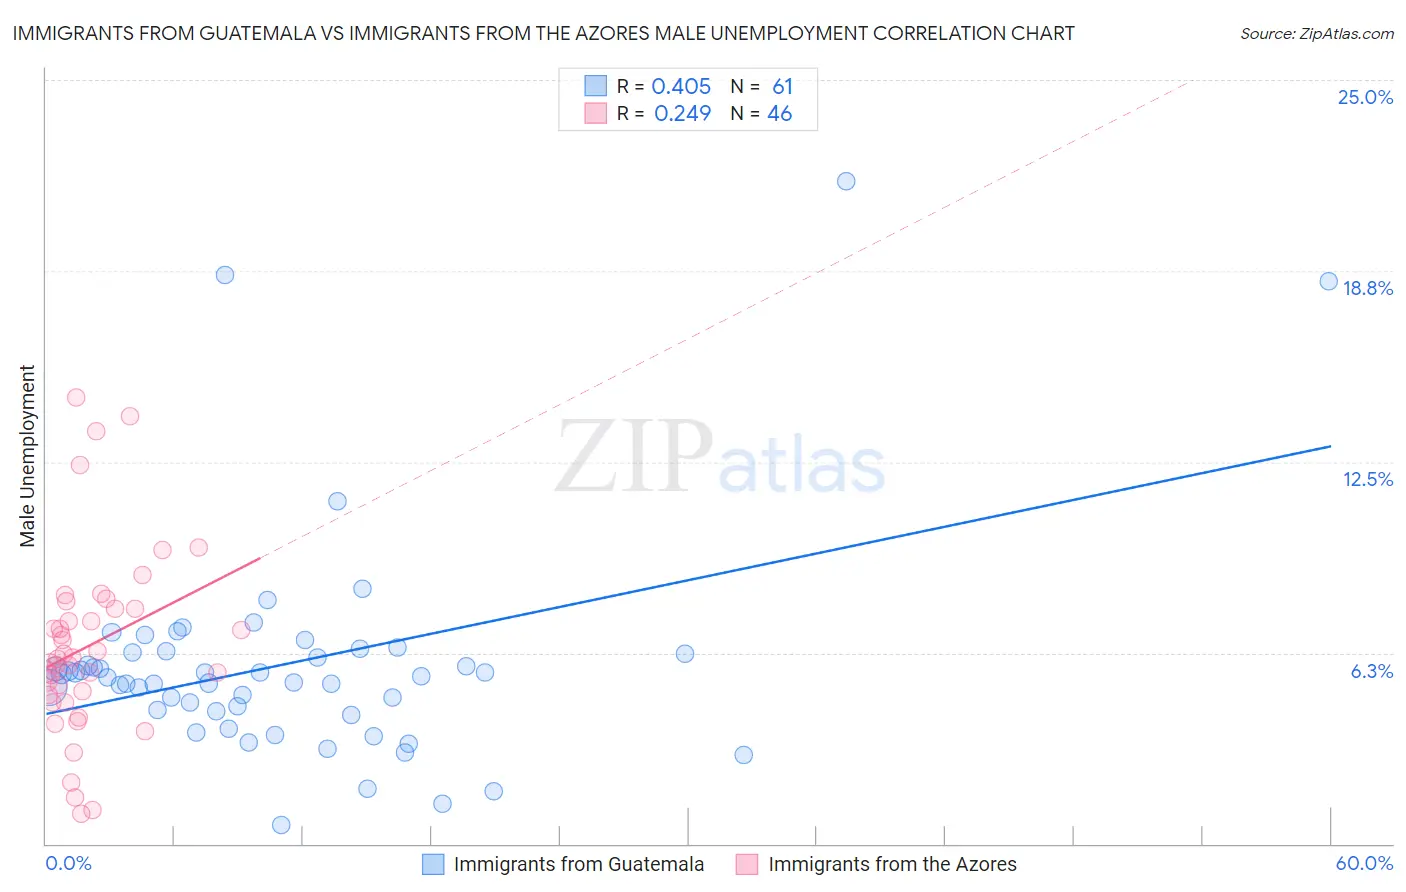 Immigrants from Guatemala vs Immigrants from the Azores Male Unemployment